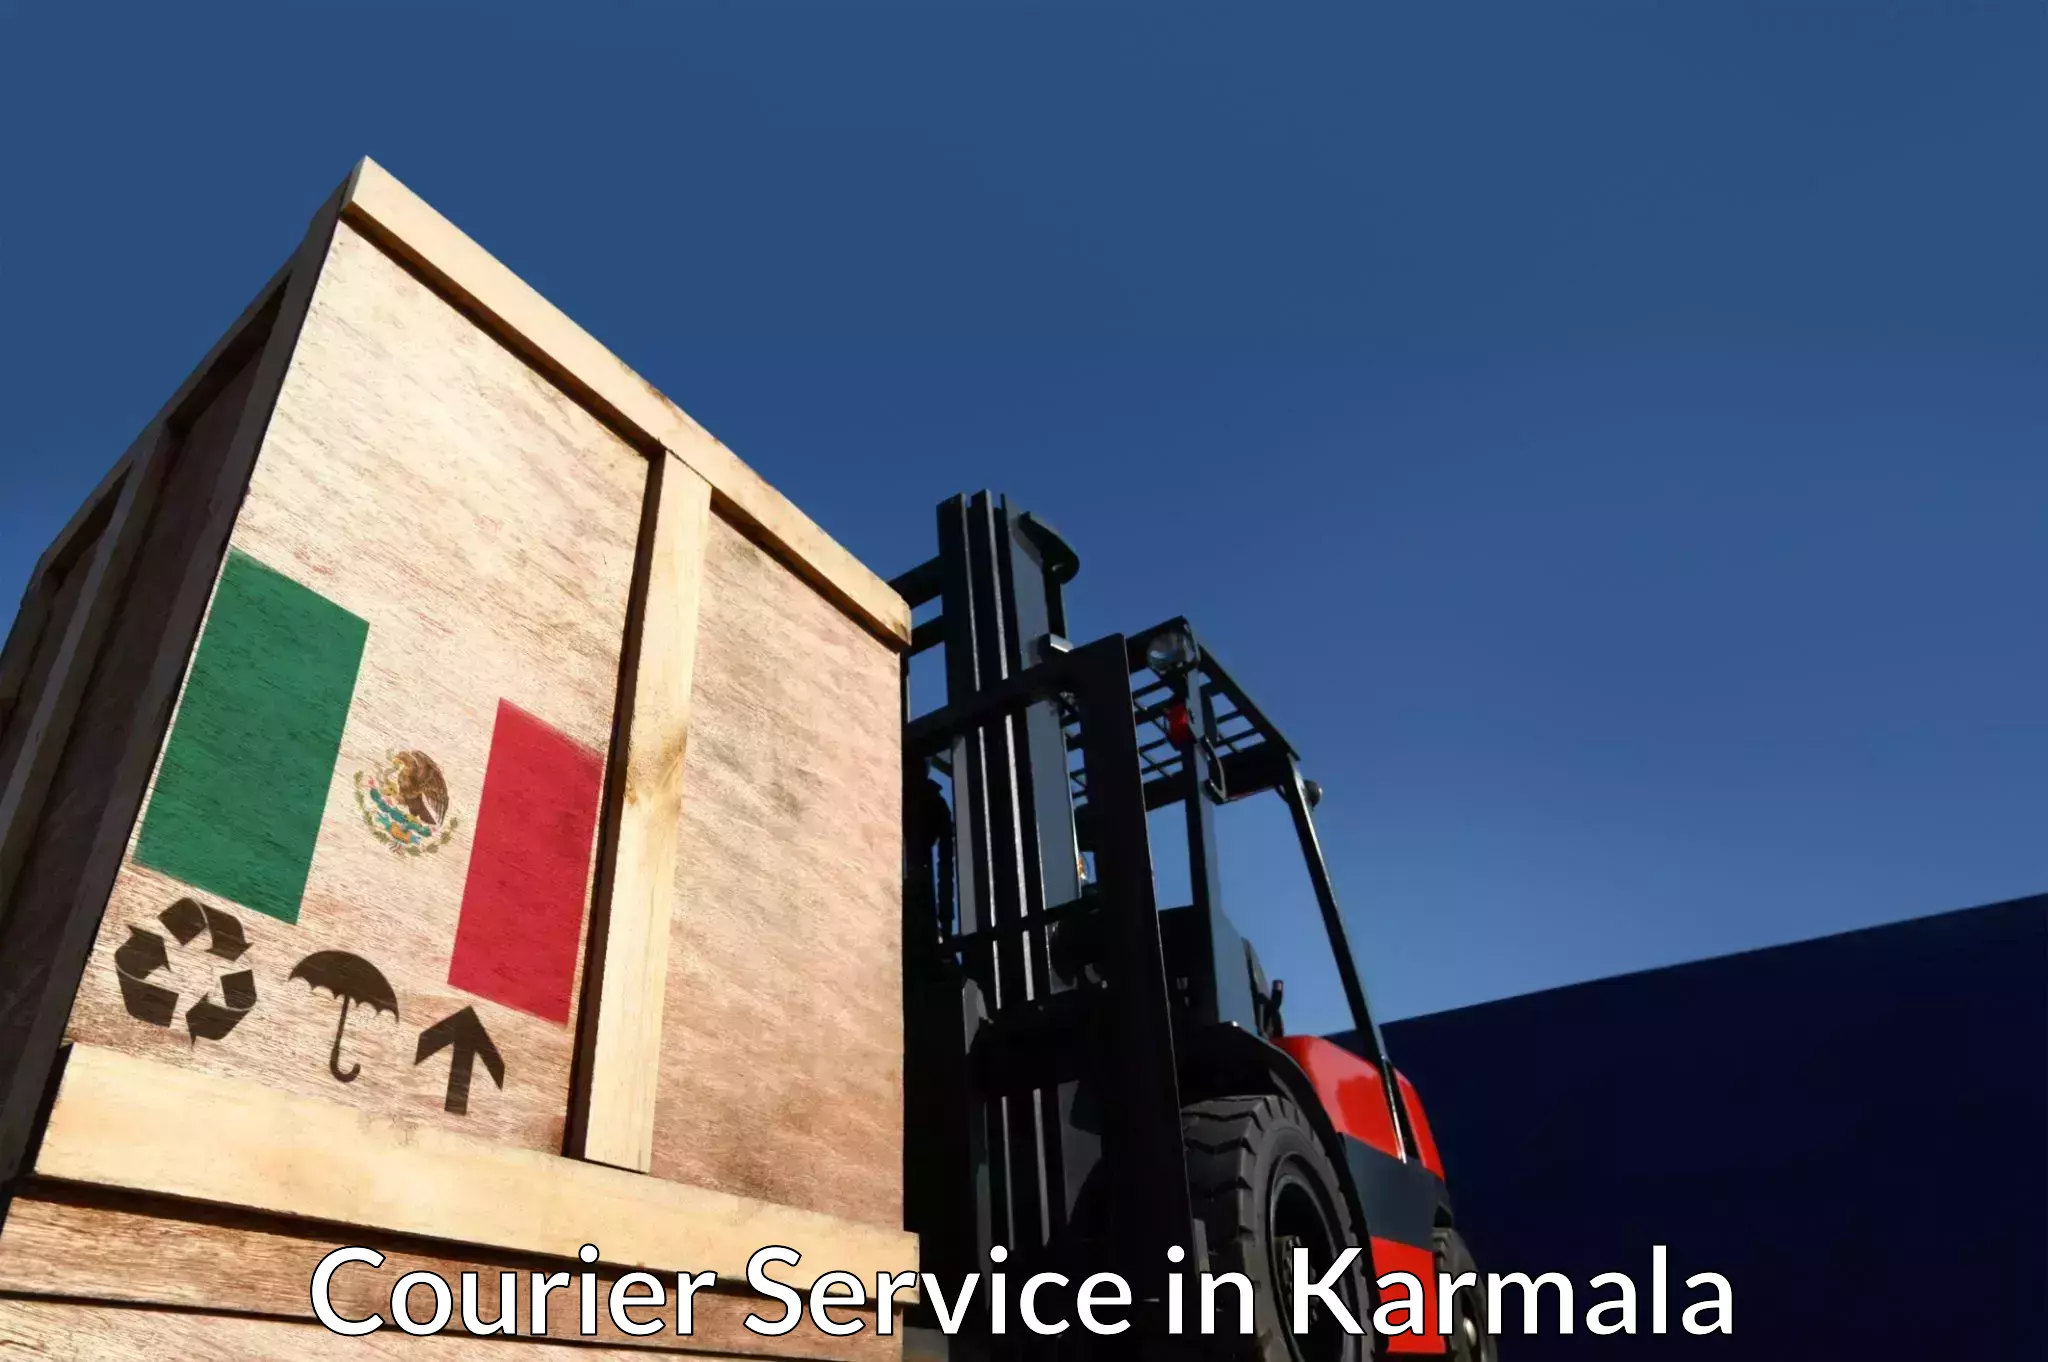 Parcel handling and care in Karmala